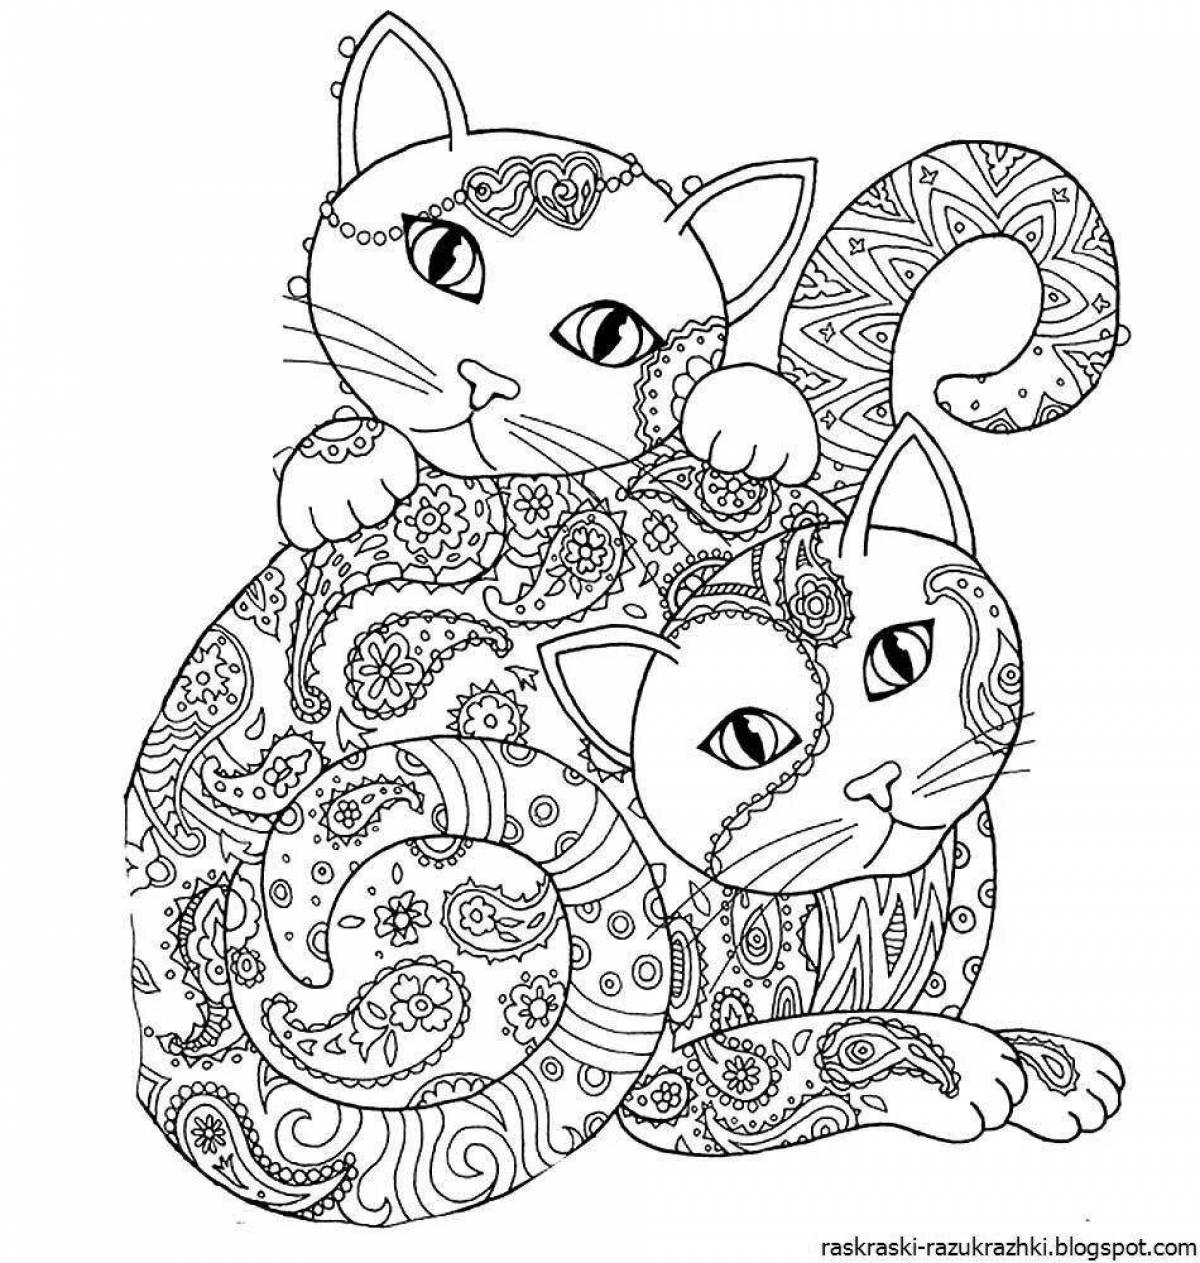 Adorable 10 year old animal coloring pages